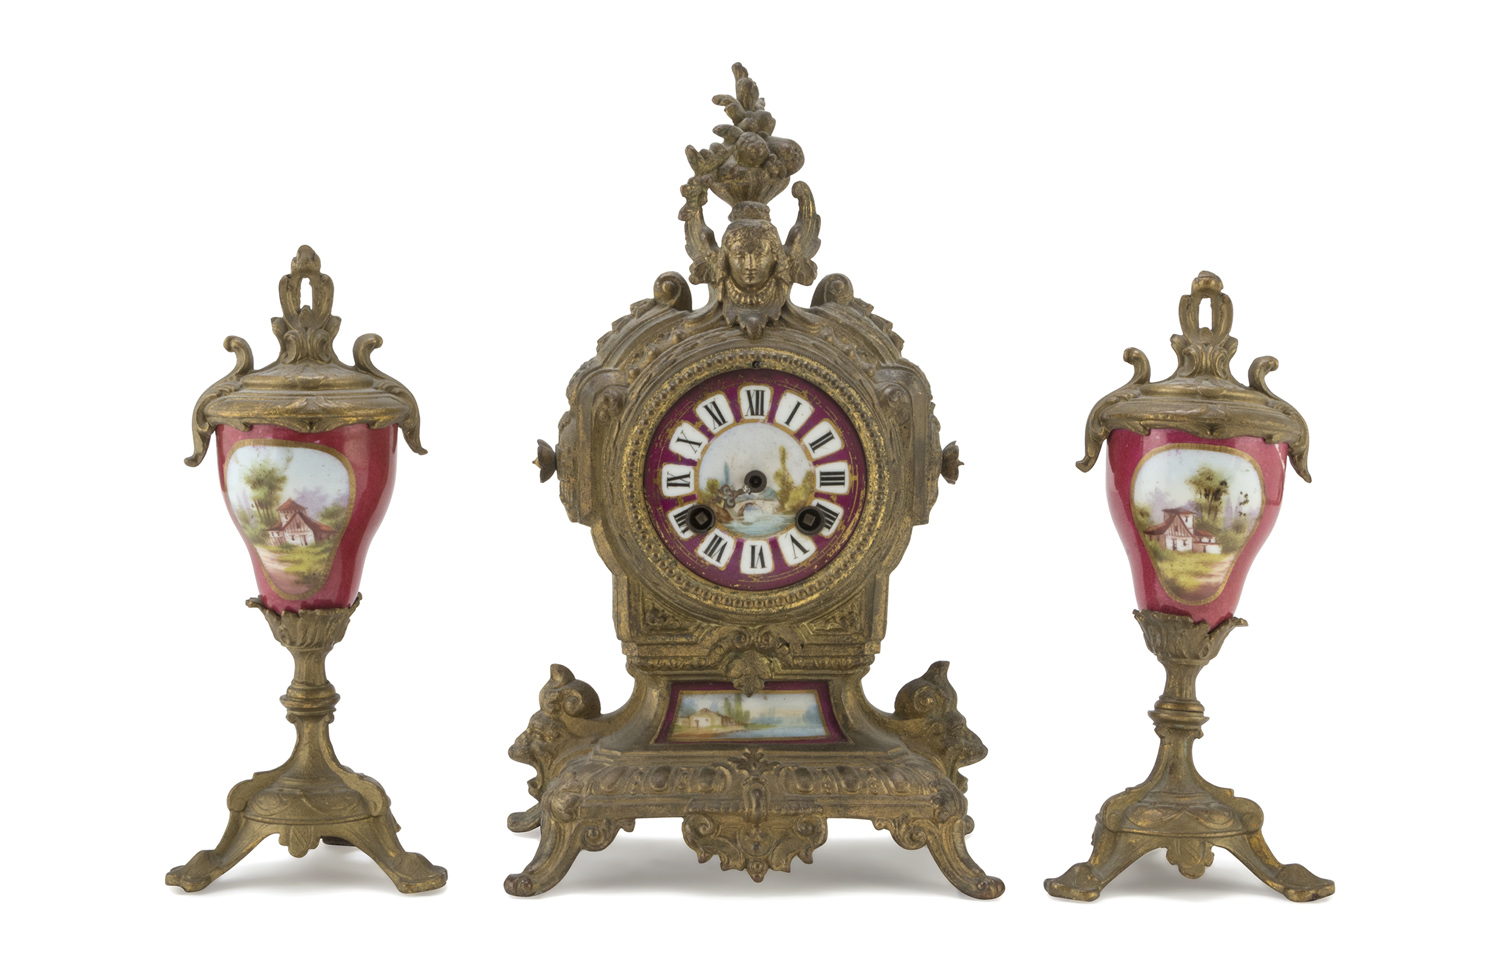 SMALL FIREPLACE TRIPTYCH WITH PORCELAIN PLATES 19TH CENTURY